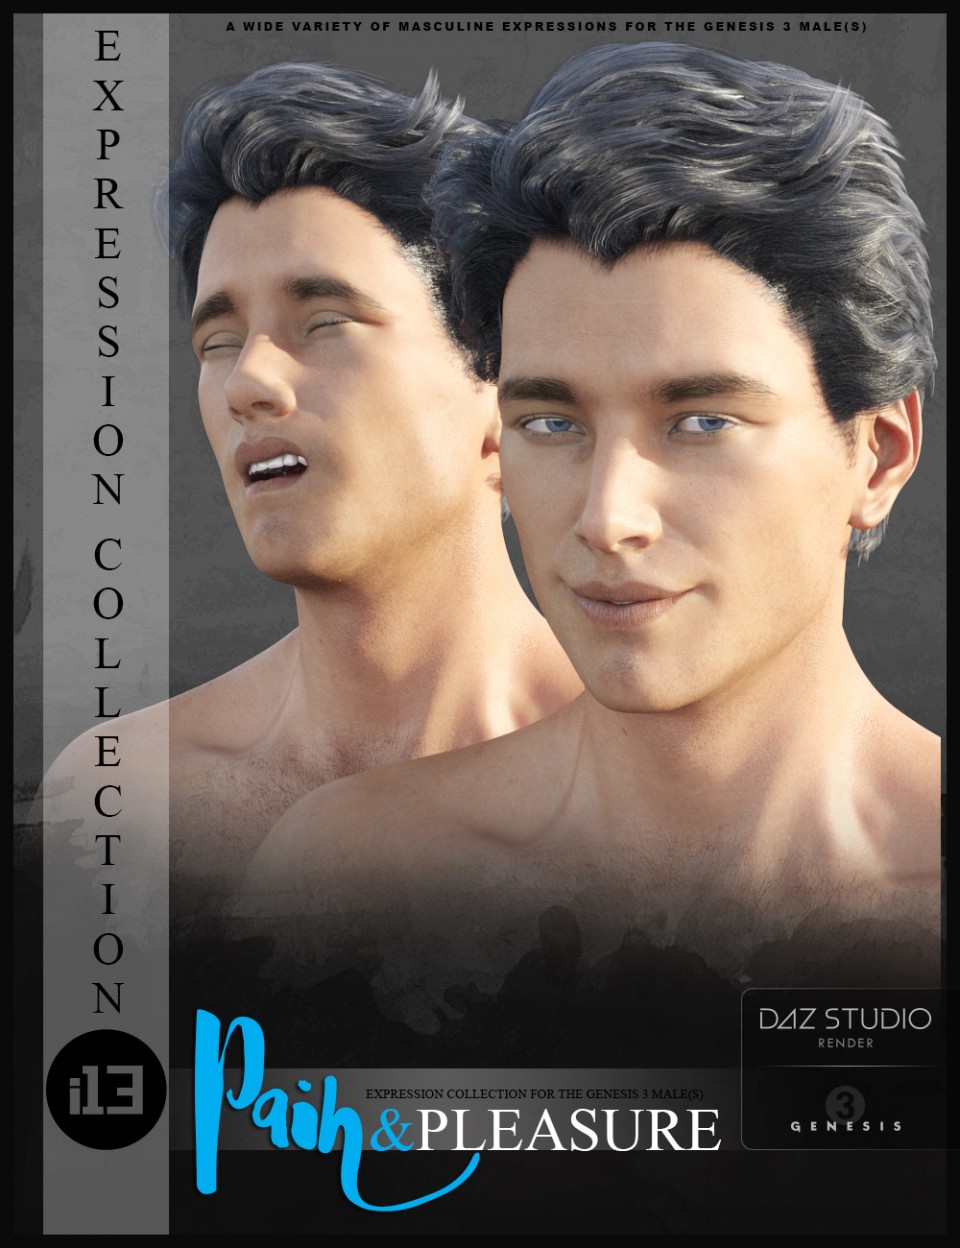 i13 Pain and Pleasure Expressions for the Genesis 3 Male(s)